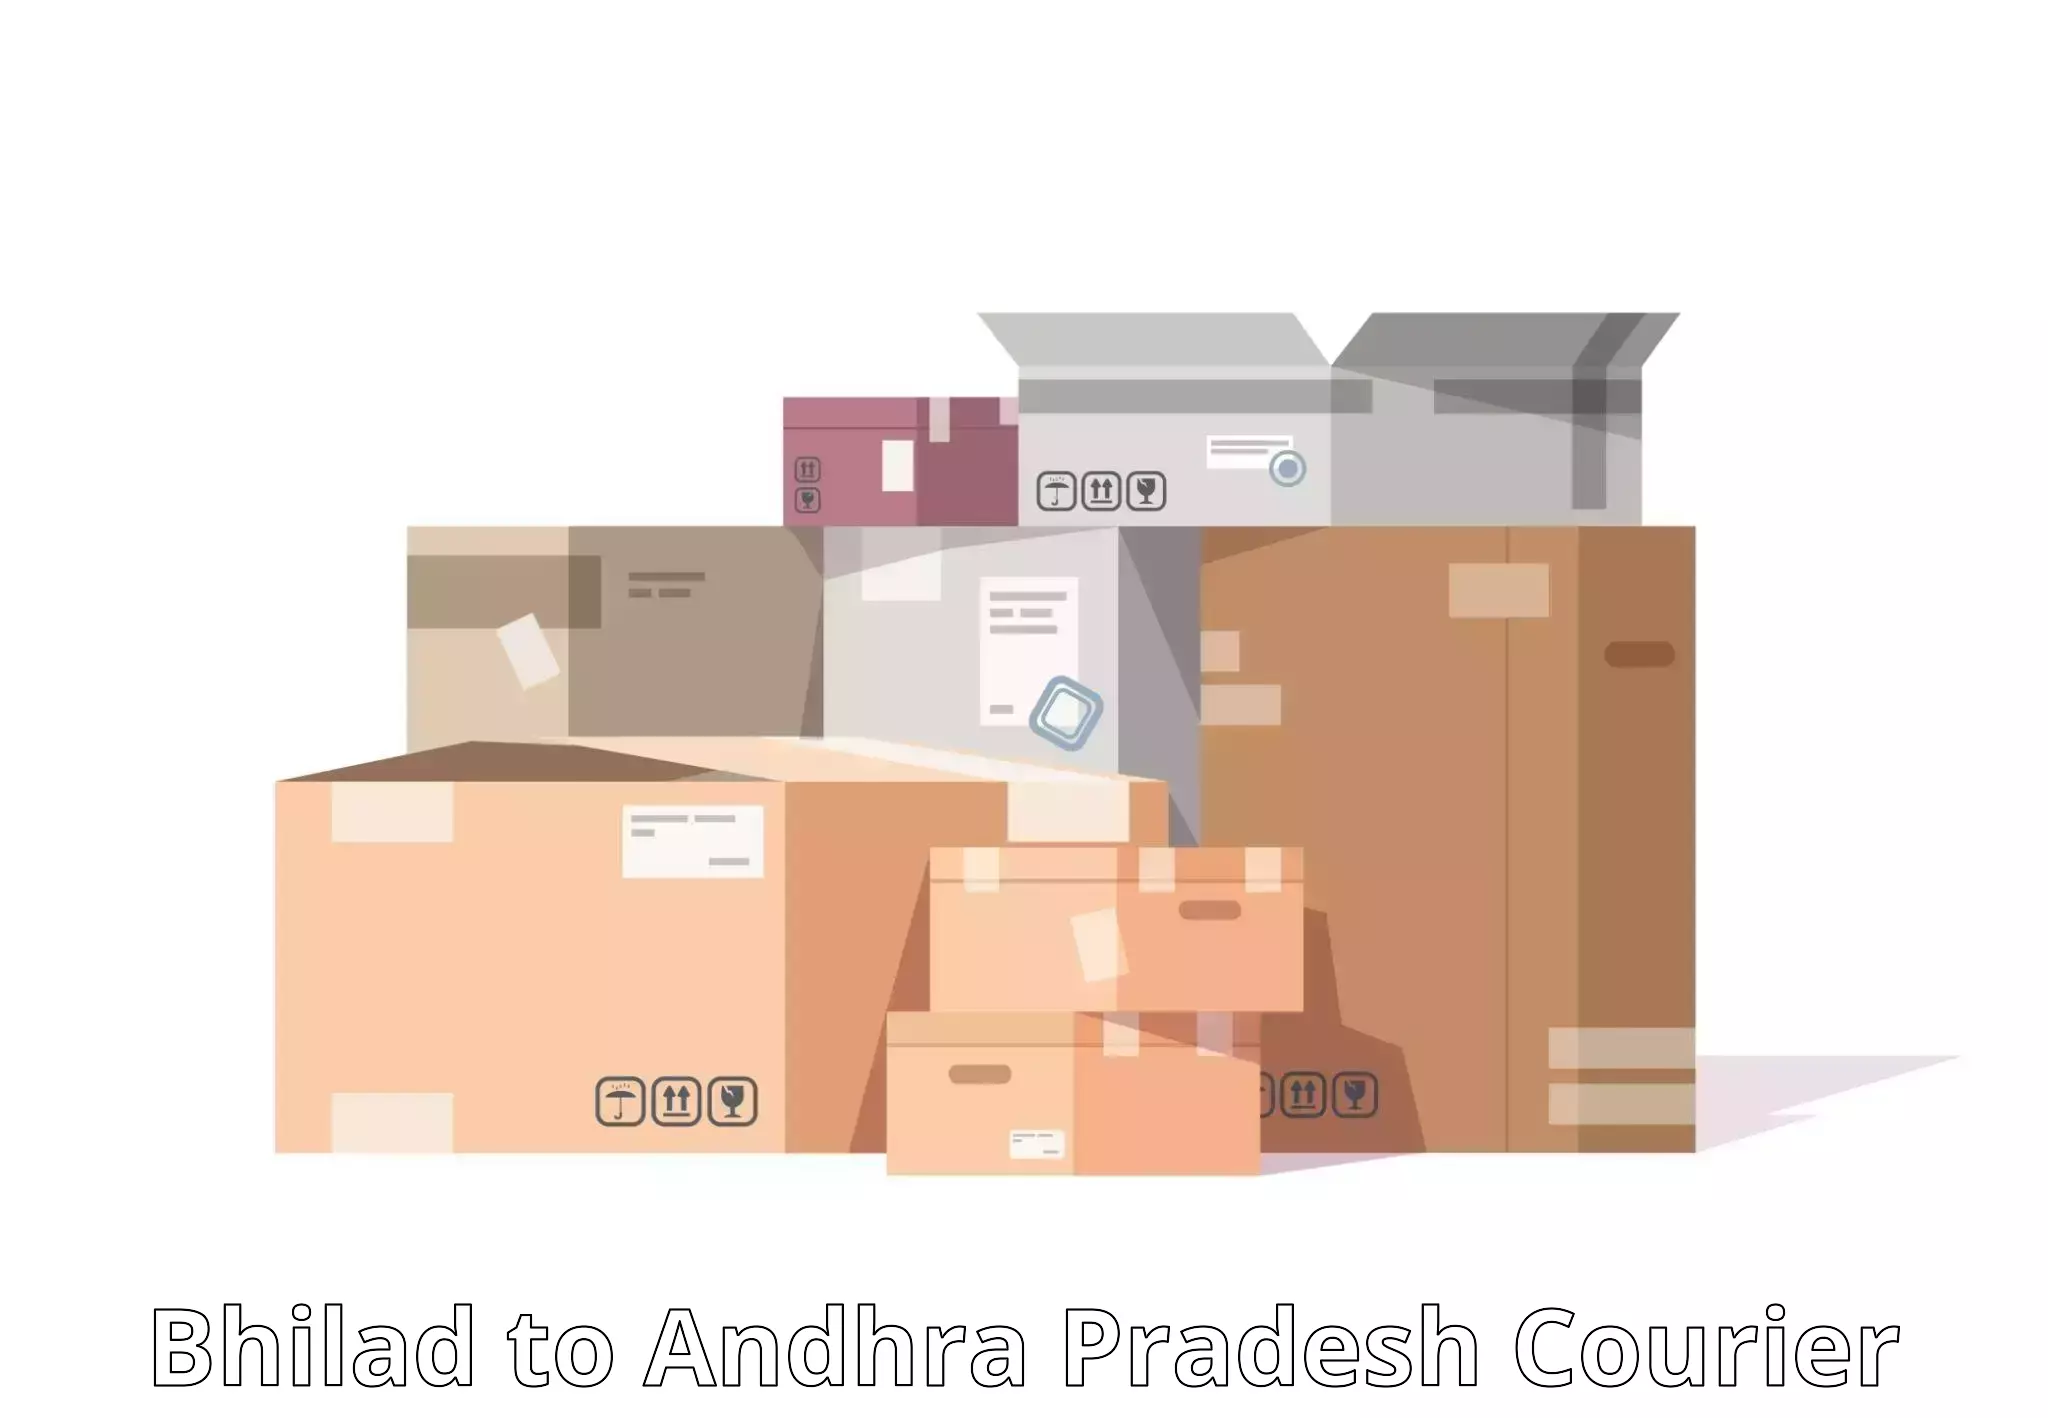 Modern courier technology Bhilad to Gopalapatnam